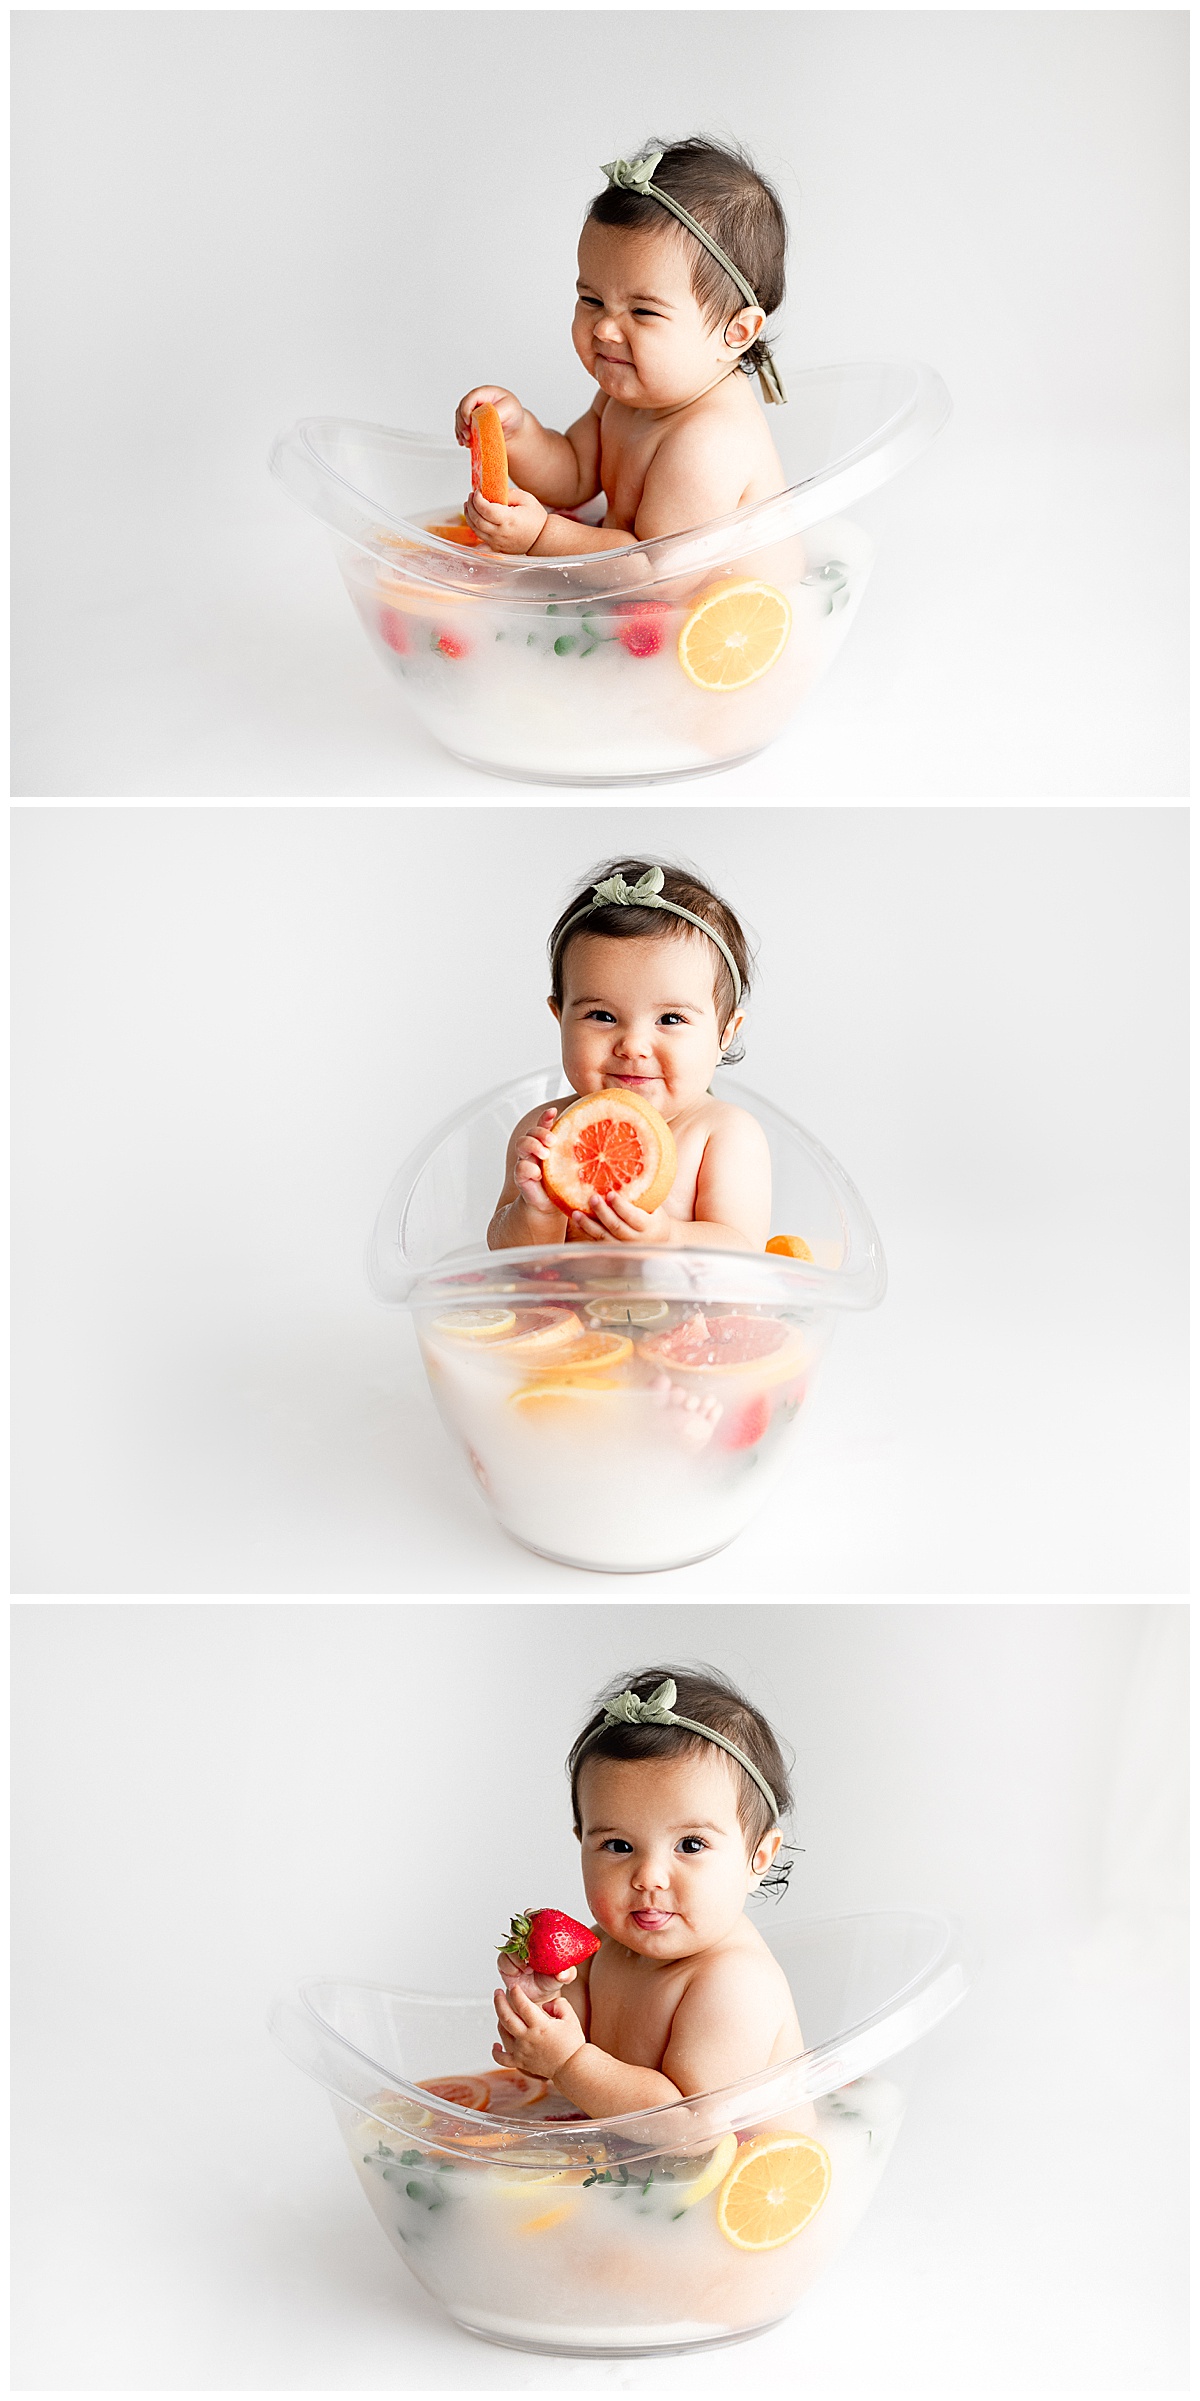 Baby sits on fruit bath during baby photography session